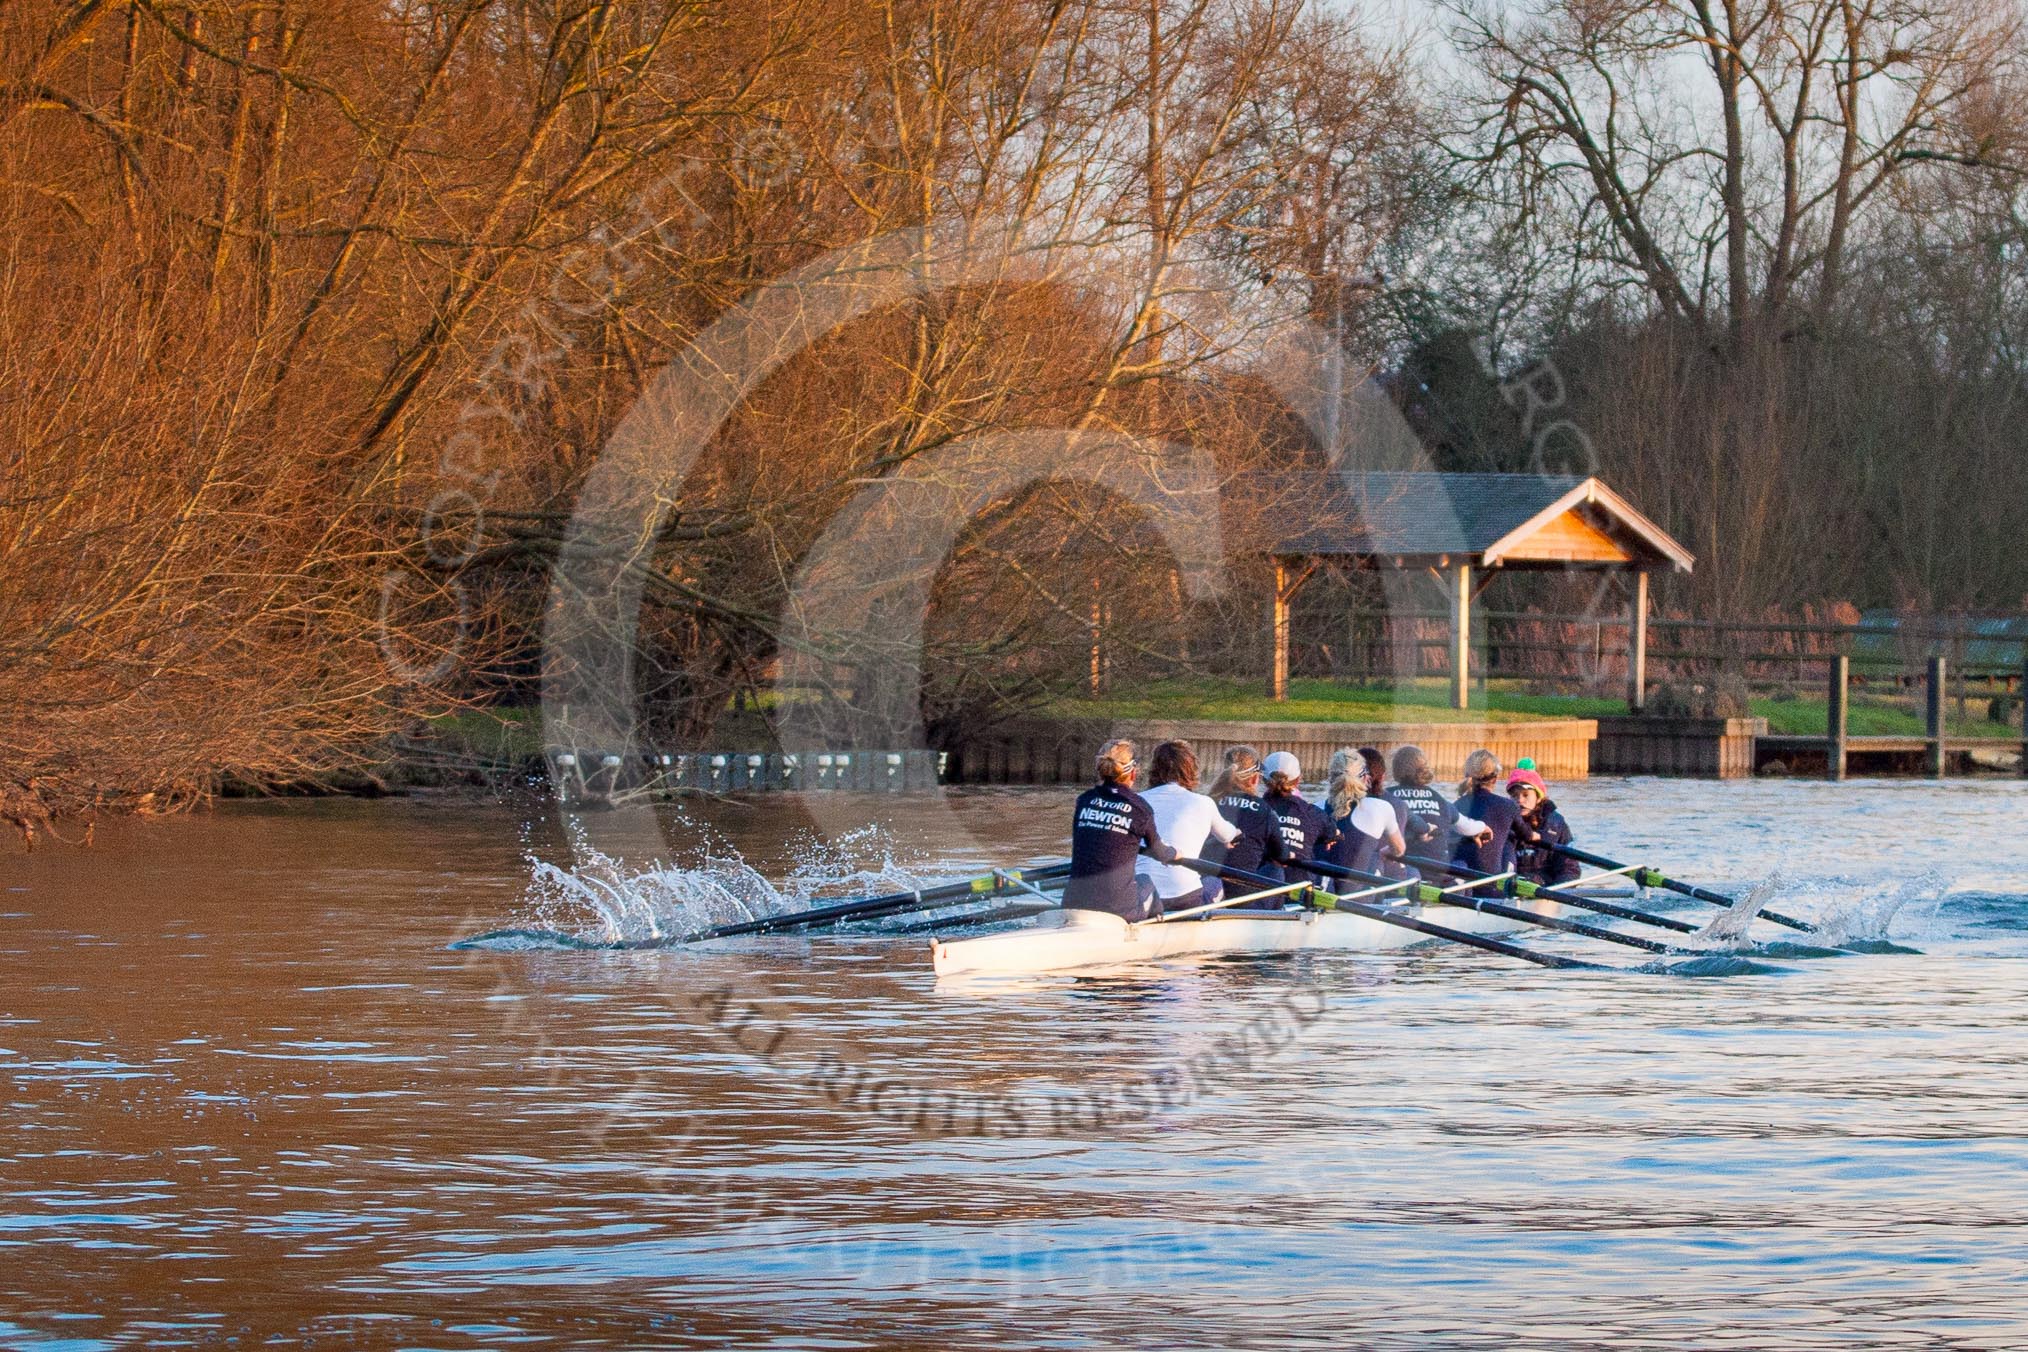 The Boat Race season 2013 - OUWBC training: In the OUWBC Blue Boat bow Mariann Novak, Alice Carrington-Windo, Mary Foord-Weston, Jo Lee, Amy Varney, Harriet Keane, Anastasia Chitty, stroke Maxie Scheske, and cox Katie Apfelbaum..
River Thames,
Wallingford,
Oxfordshire,
United Kingdom,
on 13 March 2013 at 17:36, image #175